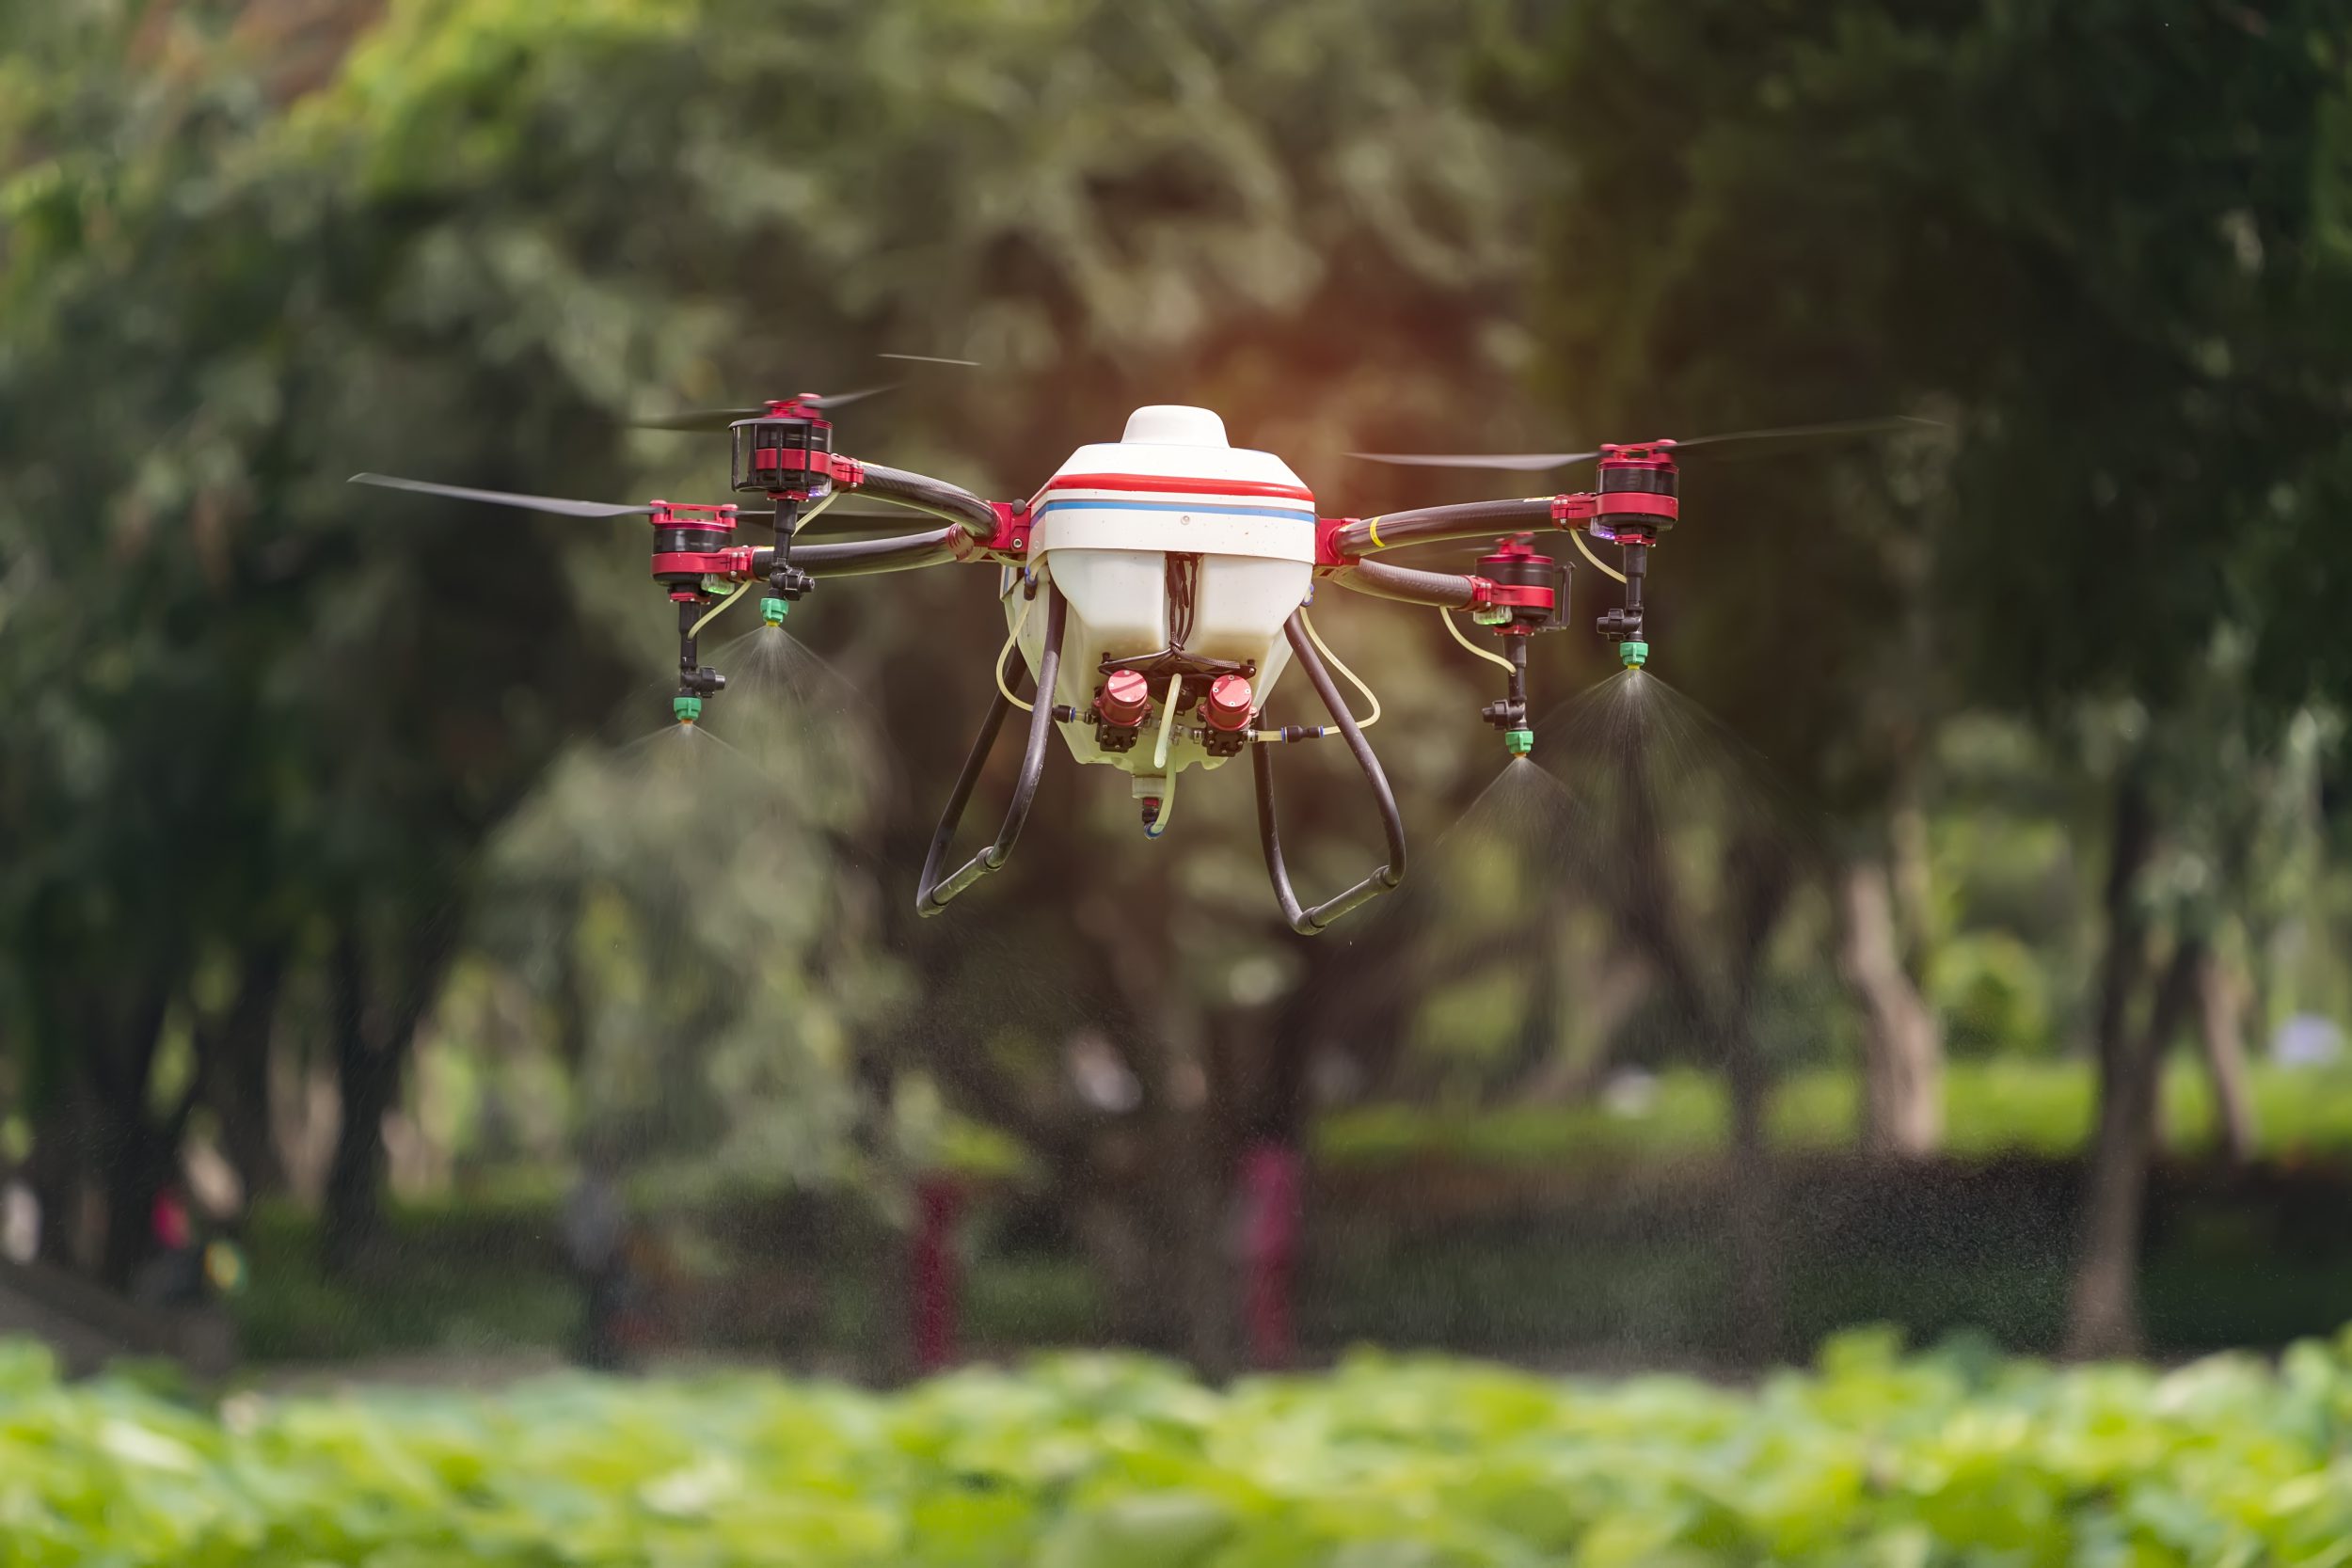 agriculture drone carry a tank of liquid fertilizer flying in the blue sky prepare to spray it in farming area